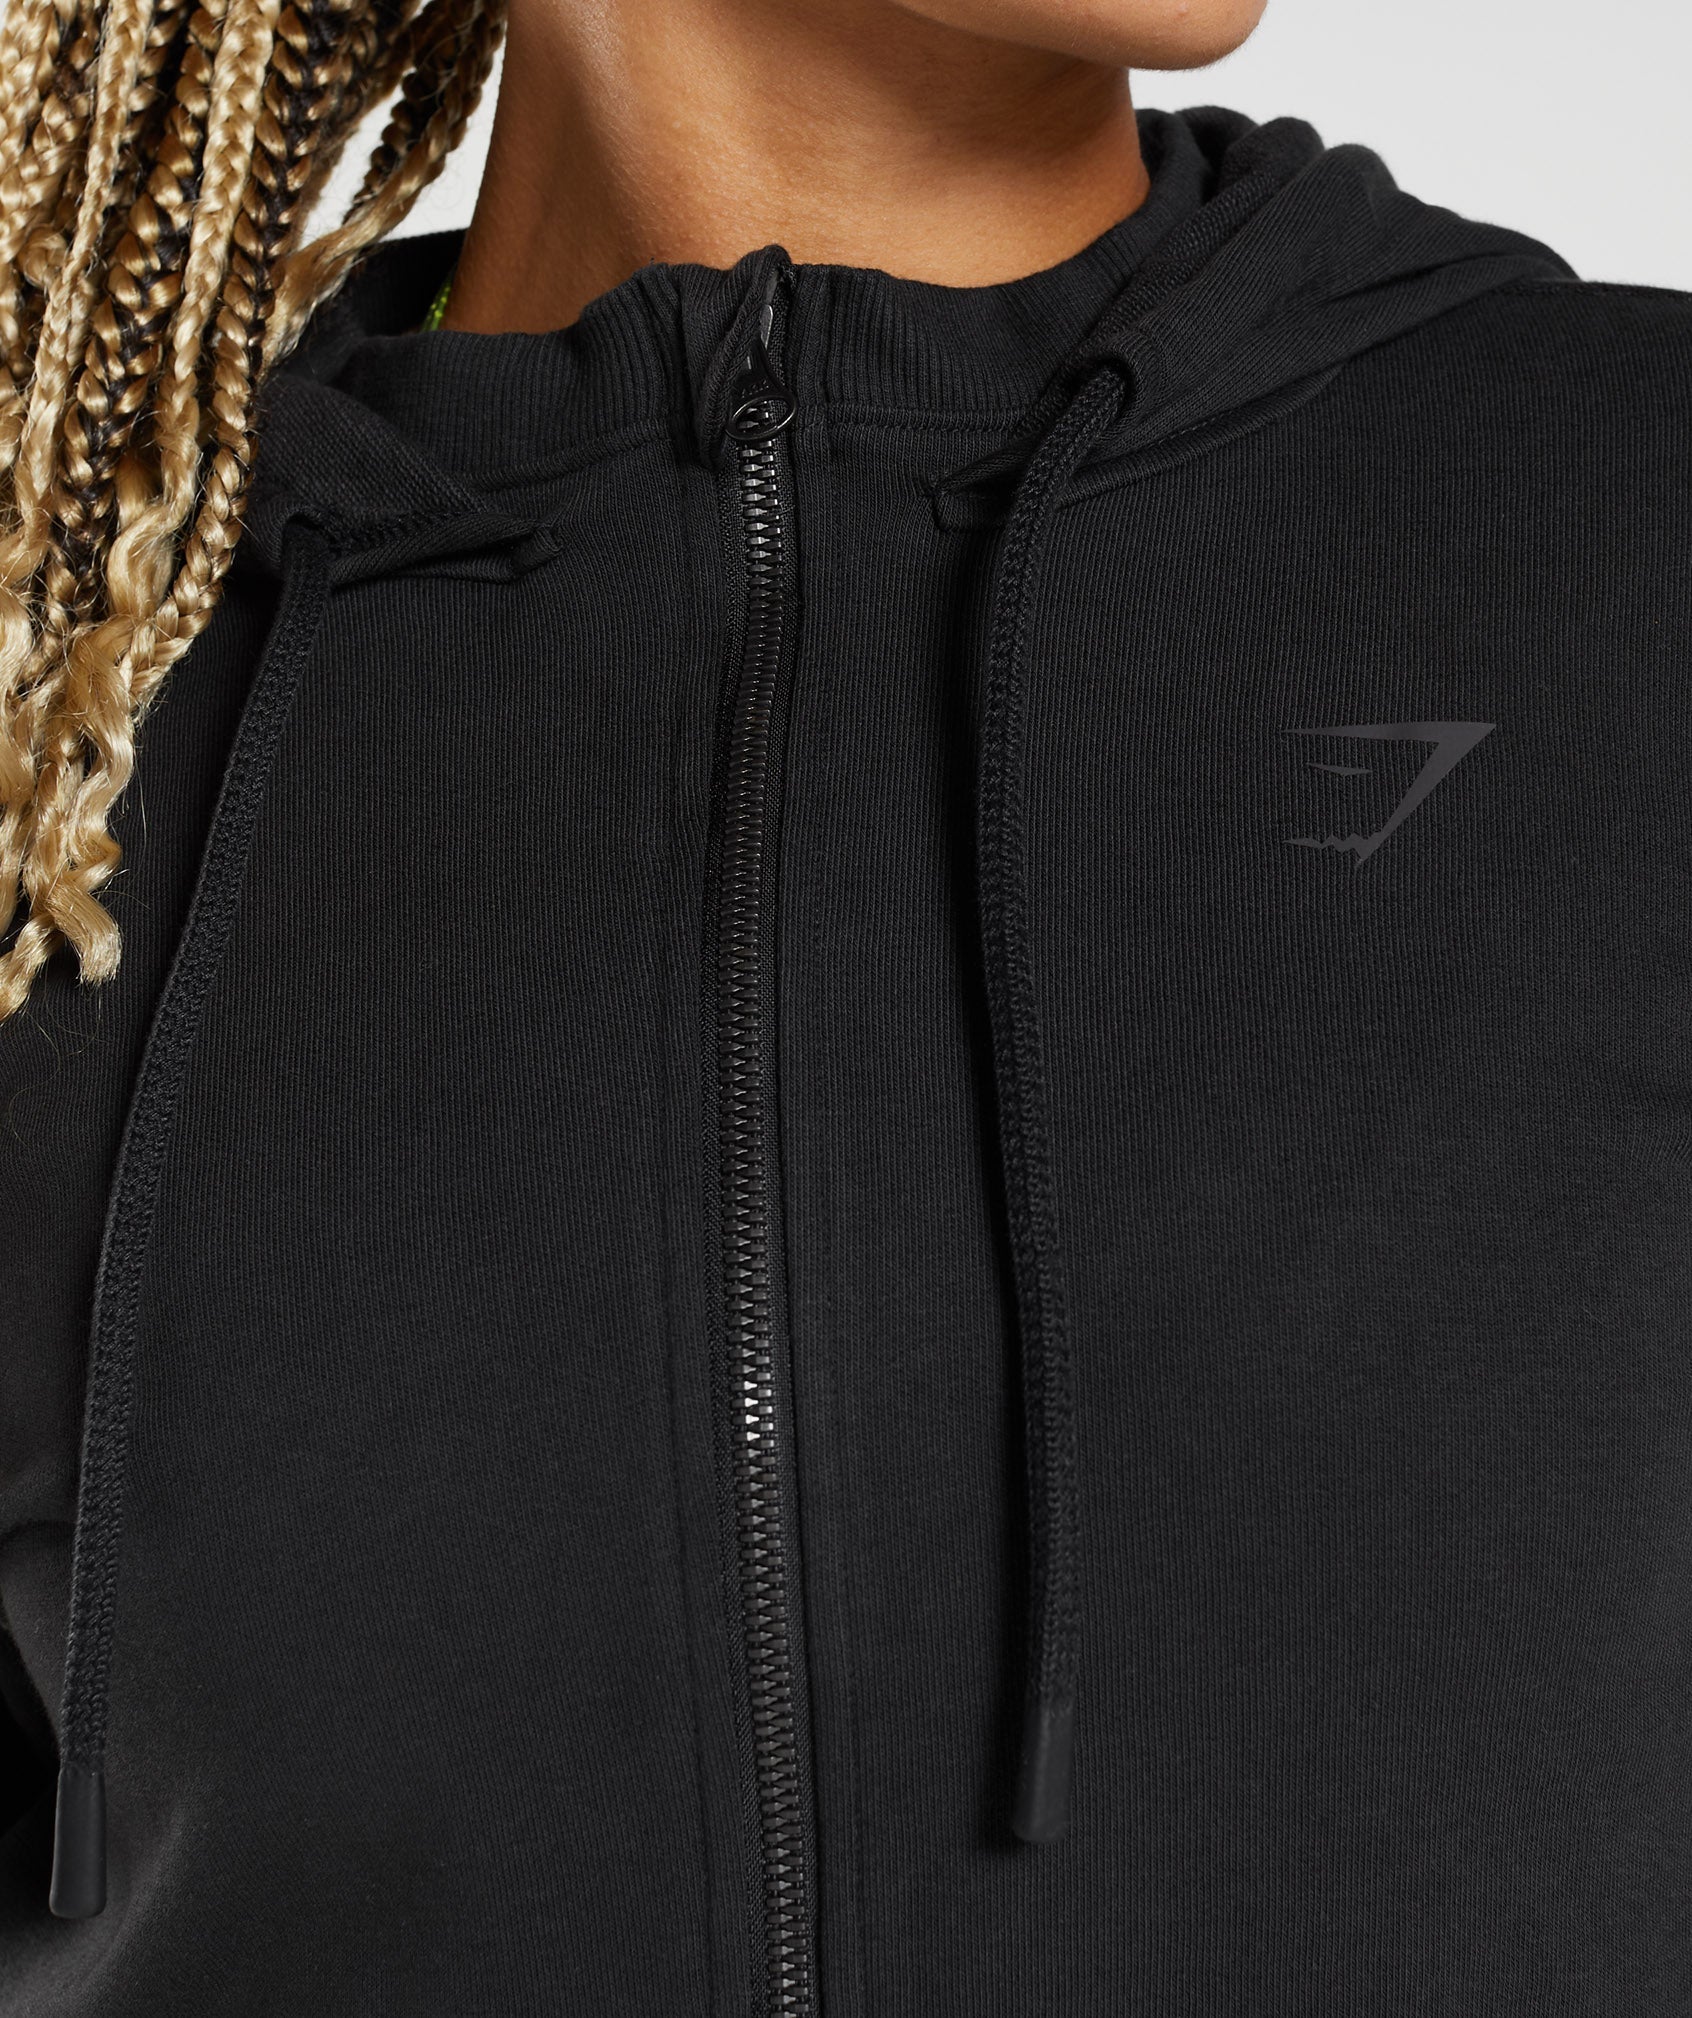 GS Power Cropped Zip Hoodie product image 6